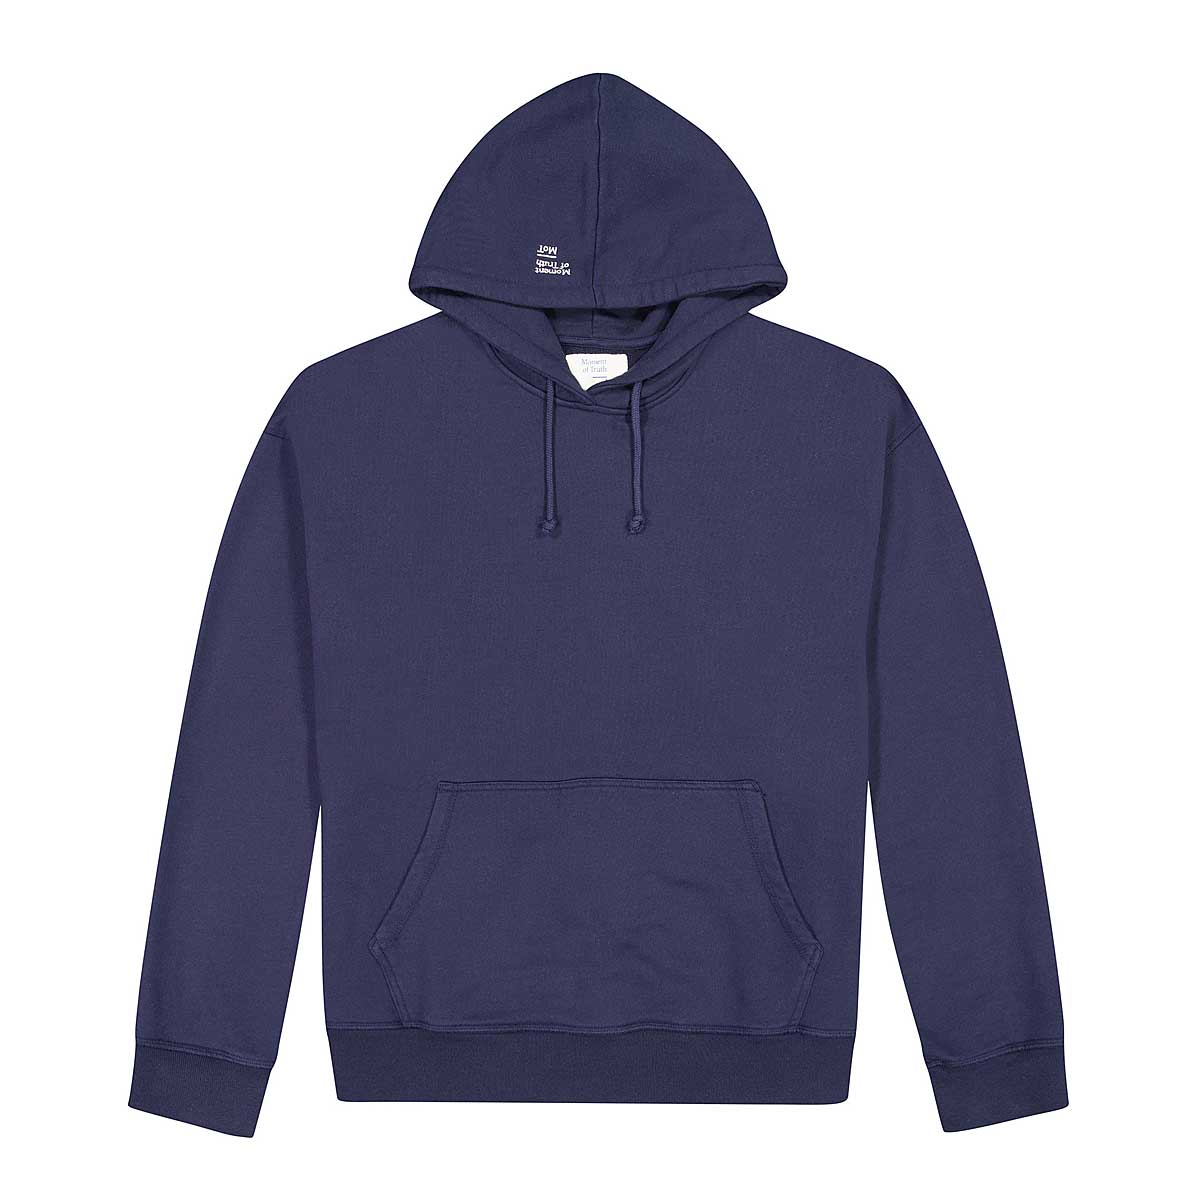 Moment Of Truth Lux Hoody, Peacoat